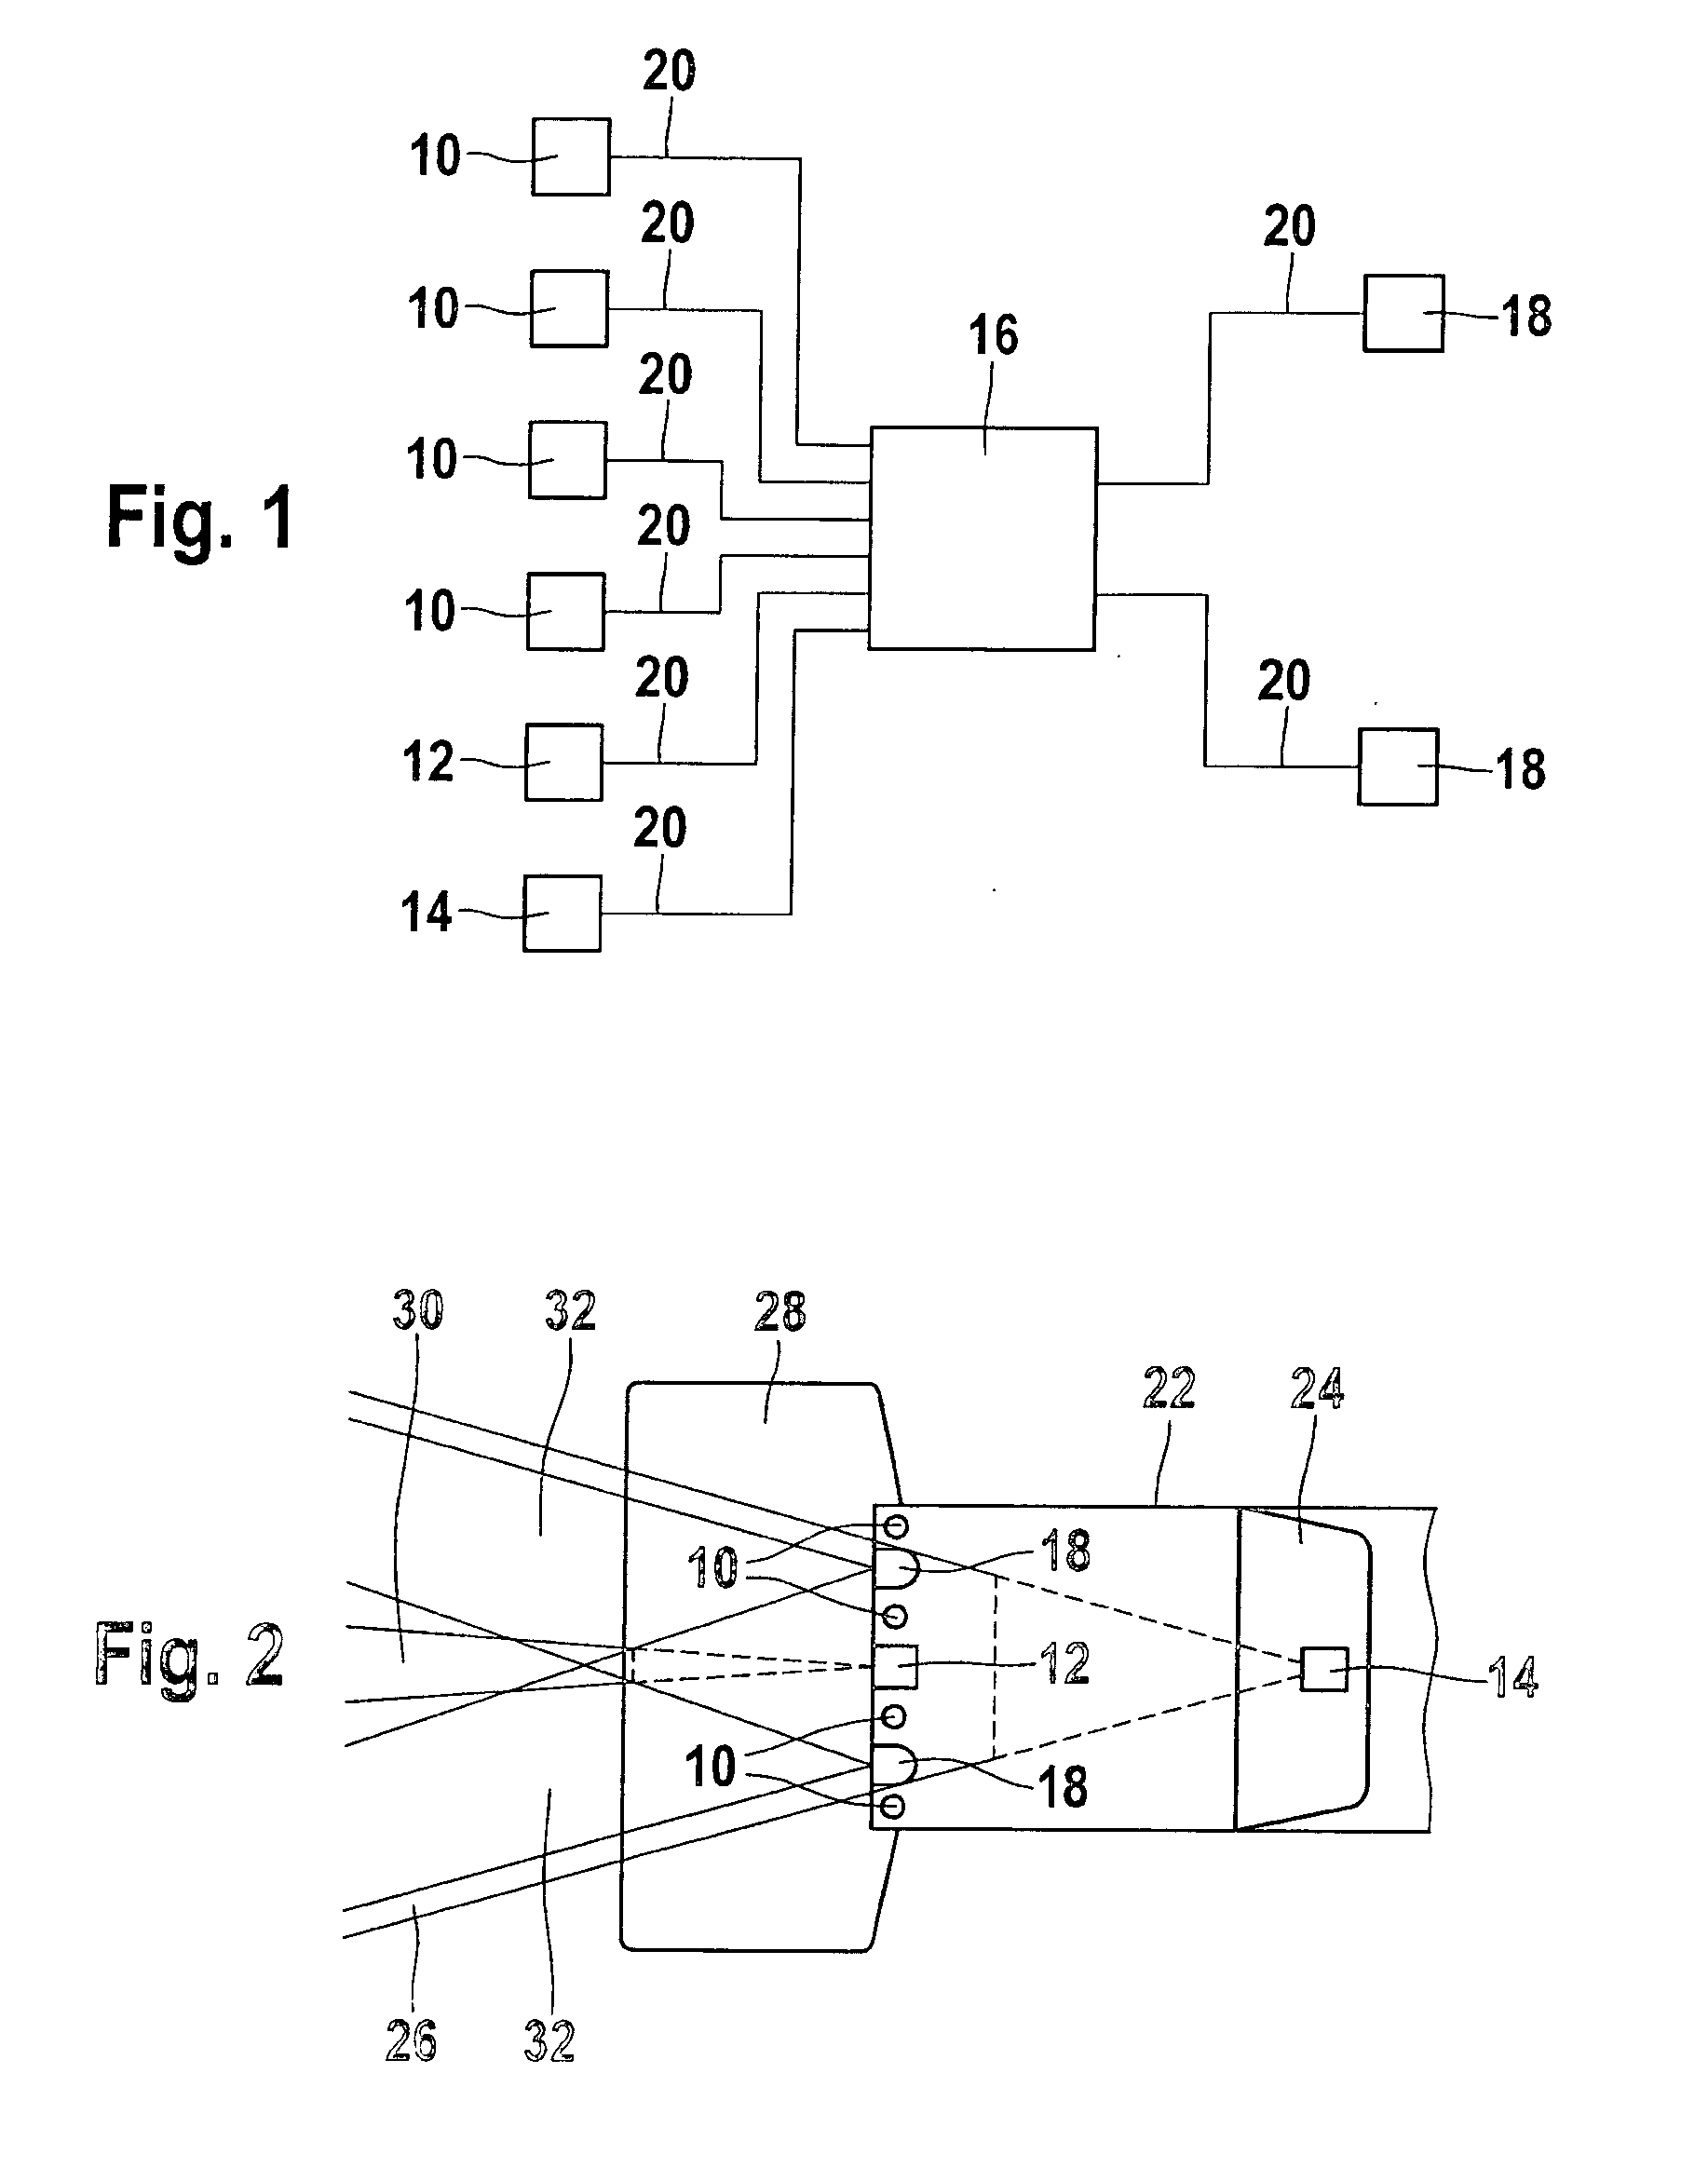 Method for improving vision in a motor vehicle